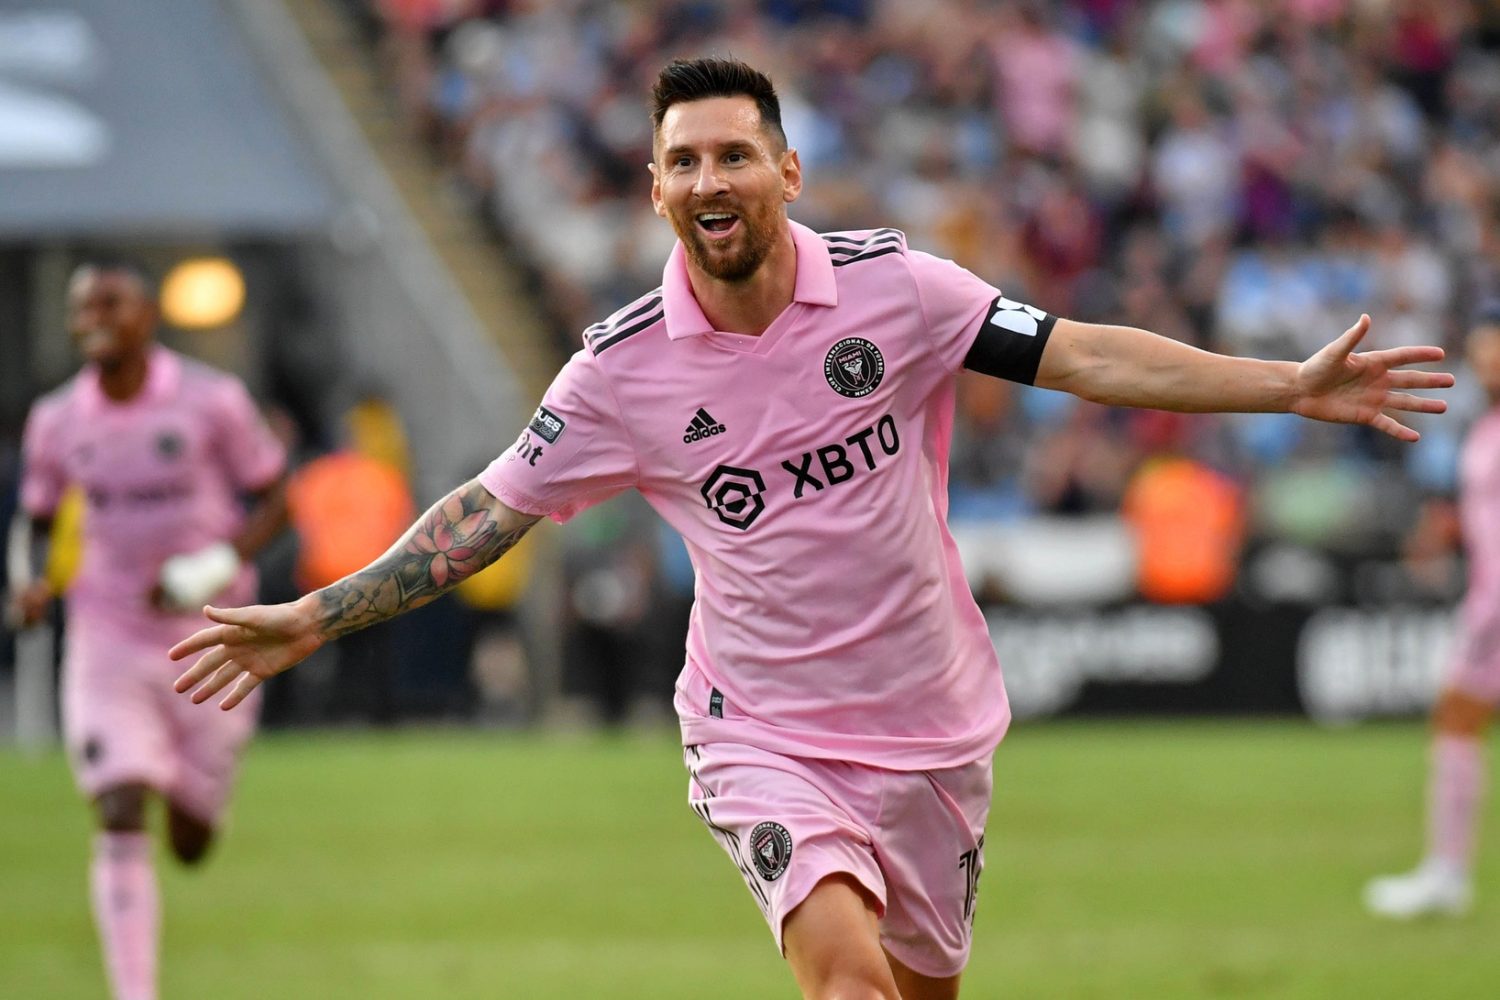 Inter Miami CF forward Lionel Messi celebrates after scoring a goal against the Philadelphia Union during the first half at Subaru Park.